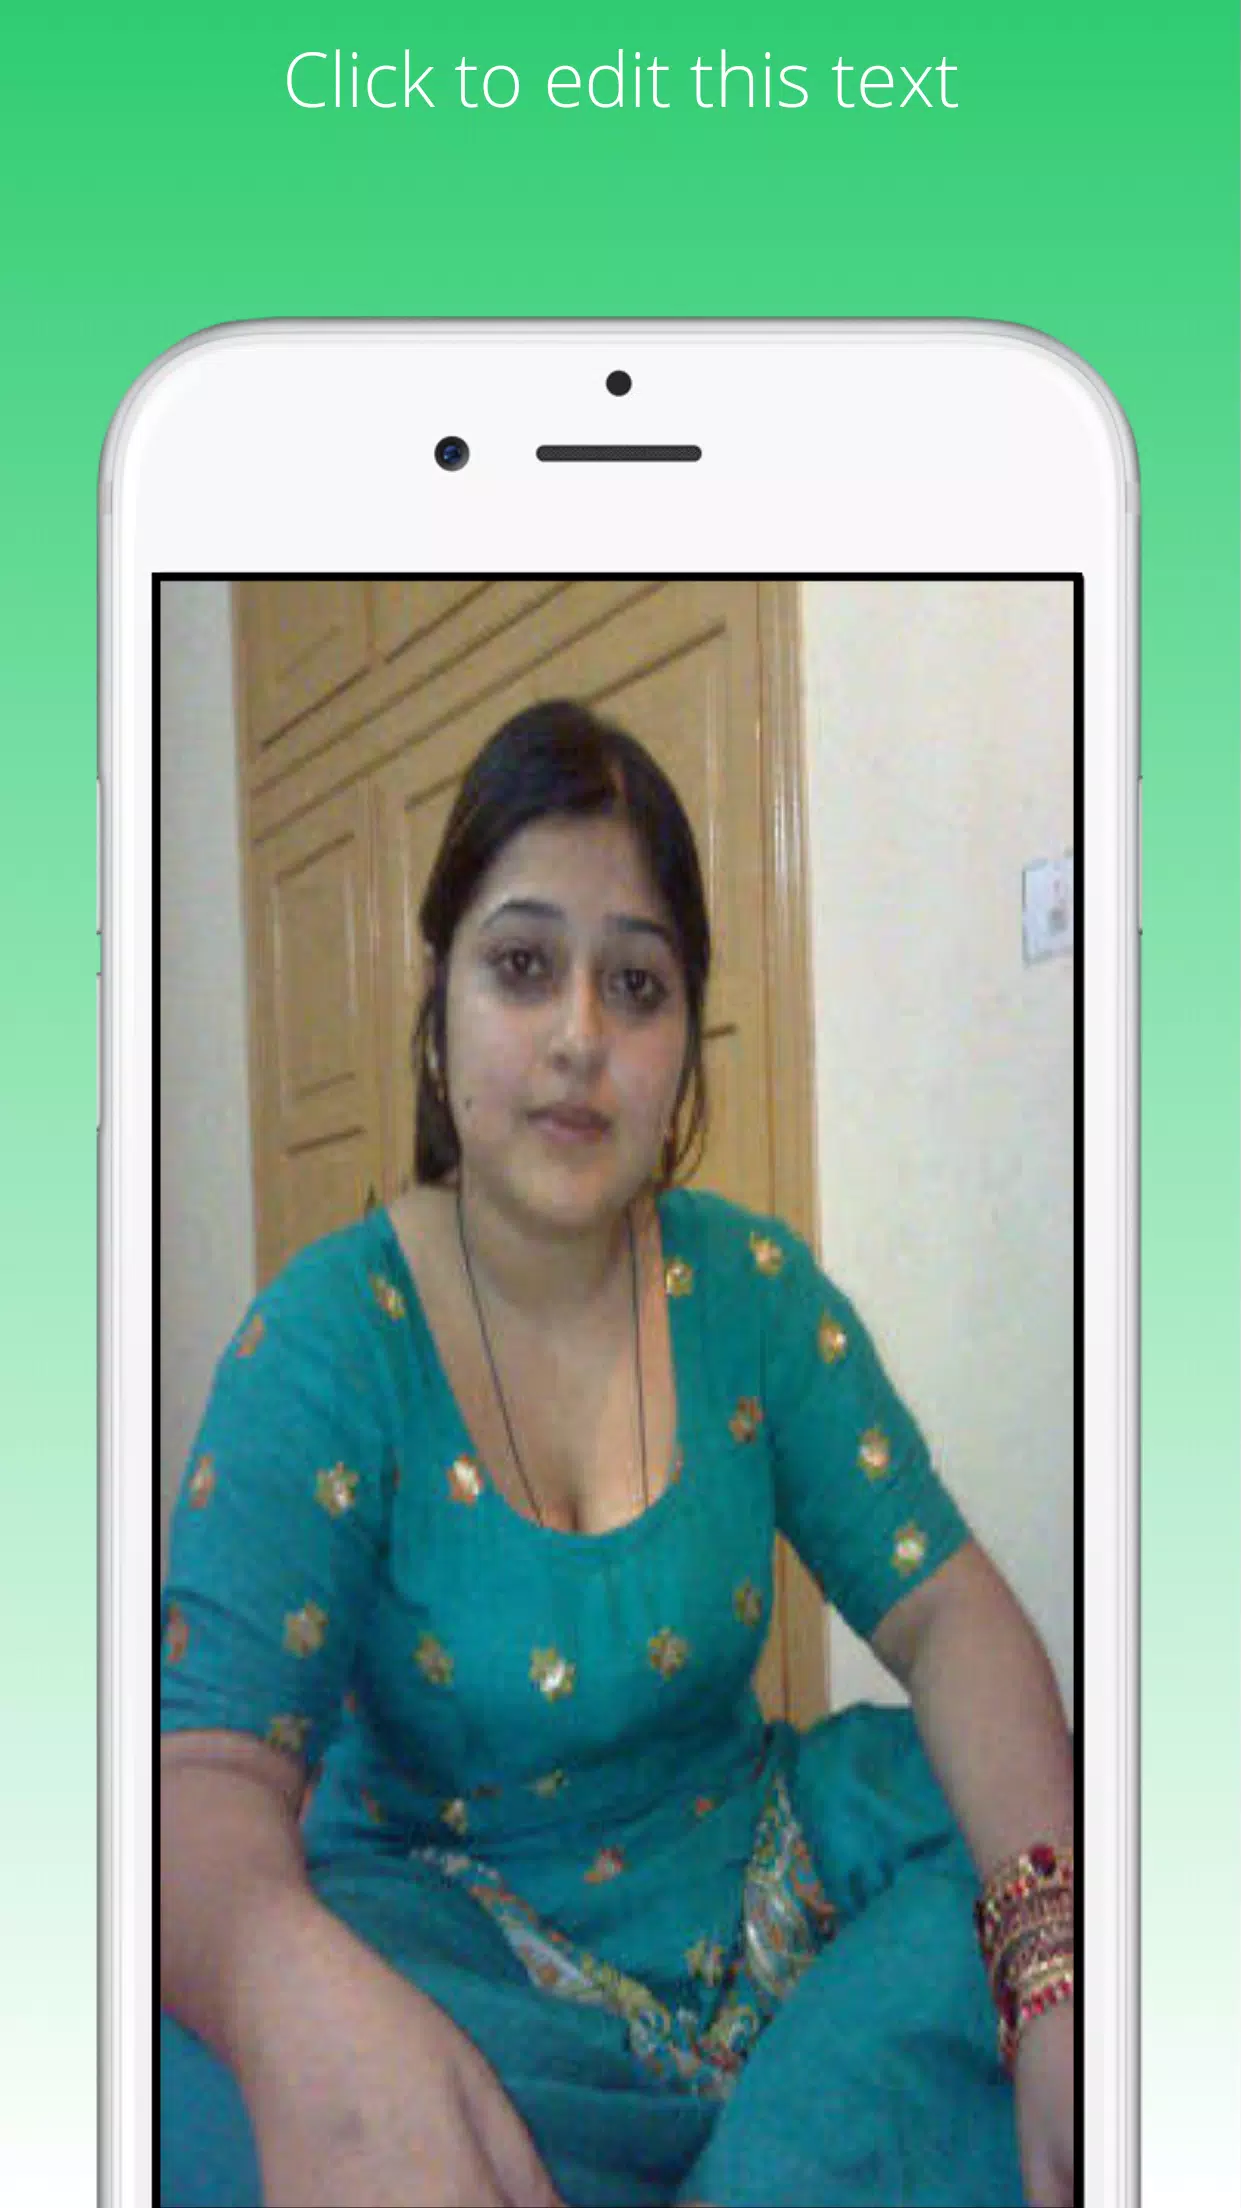 Indian Bhabhi Sexy Video Call : Hot Video Chat for Android - APK Download